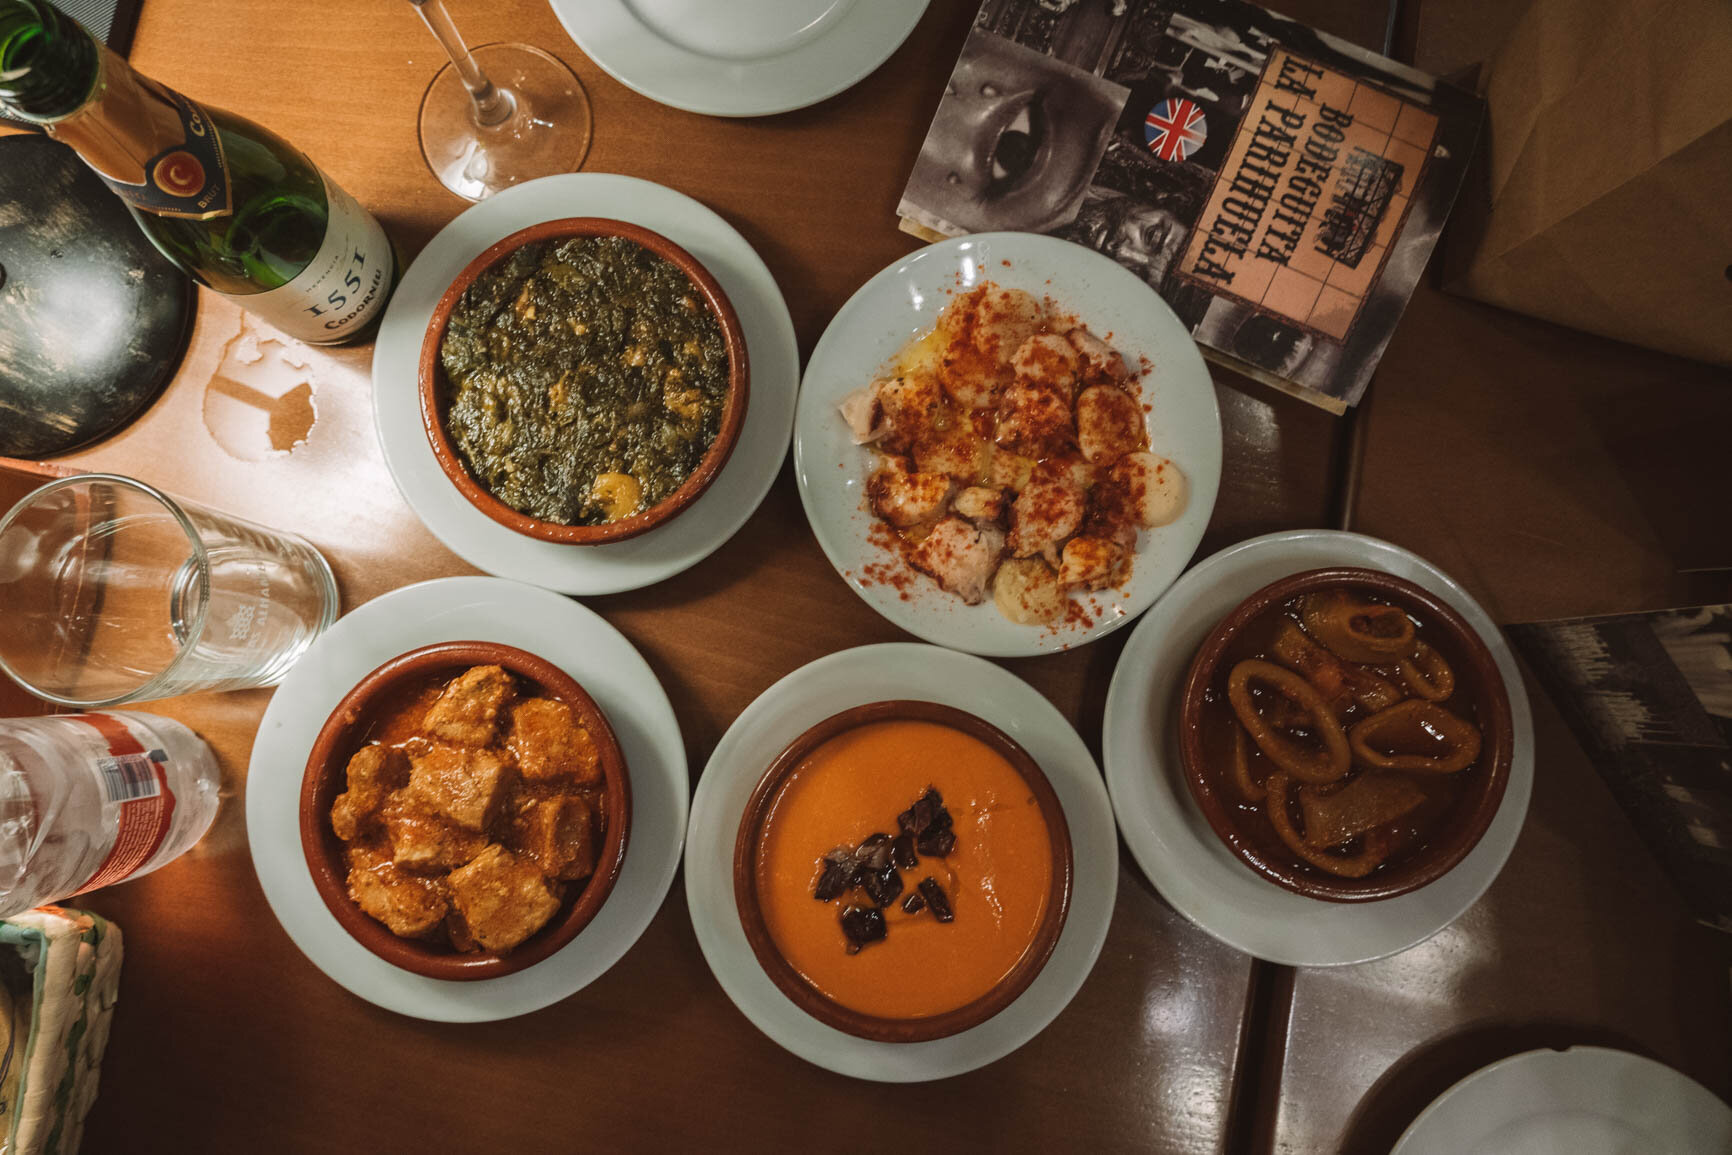 Amazing food in Seville - Food Guide to Seville, Spain: Where to eat and what to order. Dine where locals do